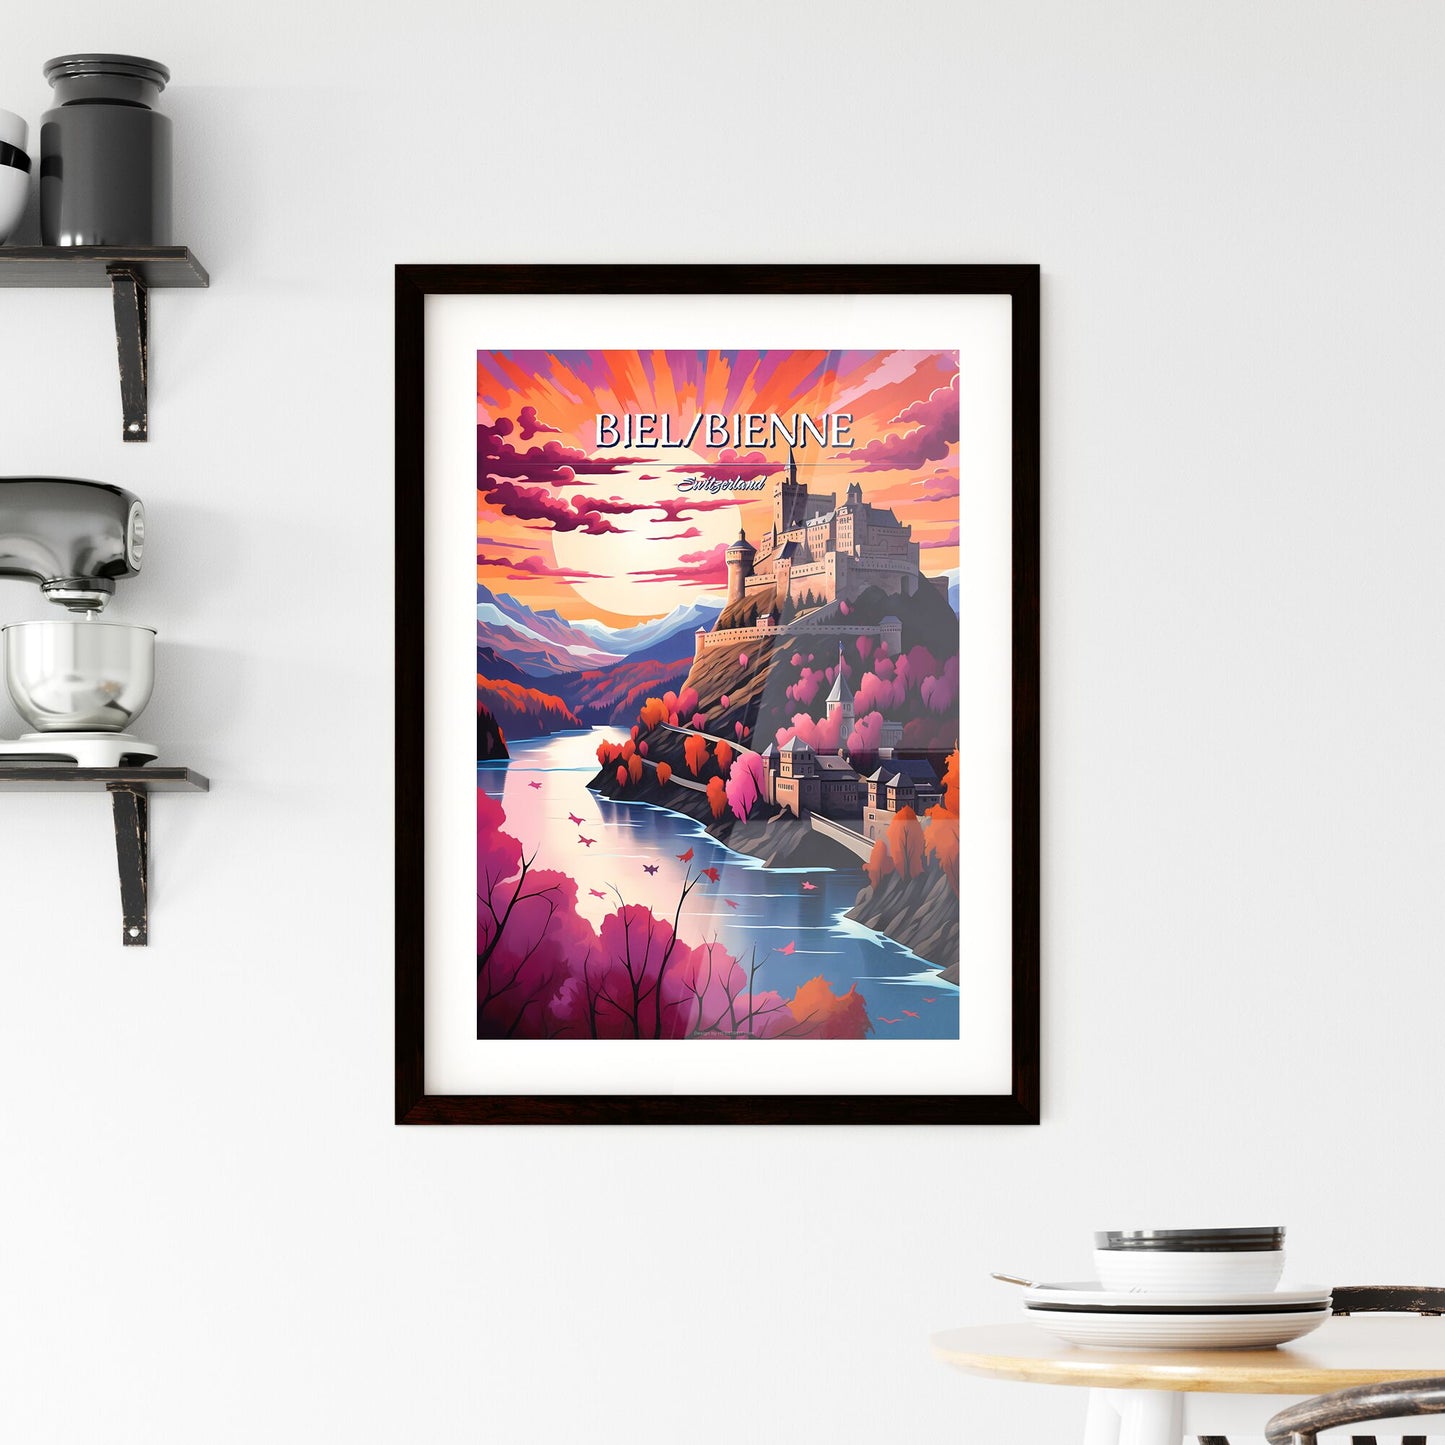 Biel/Bienne, Switzerland - Art print of a castle on a hill with a river and trees Default Title